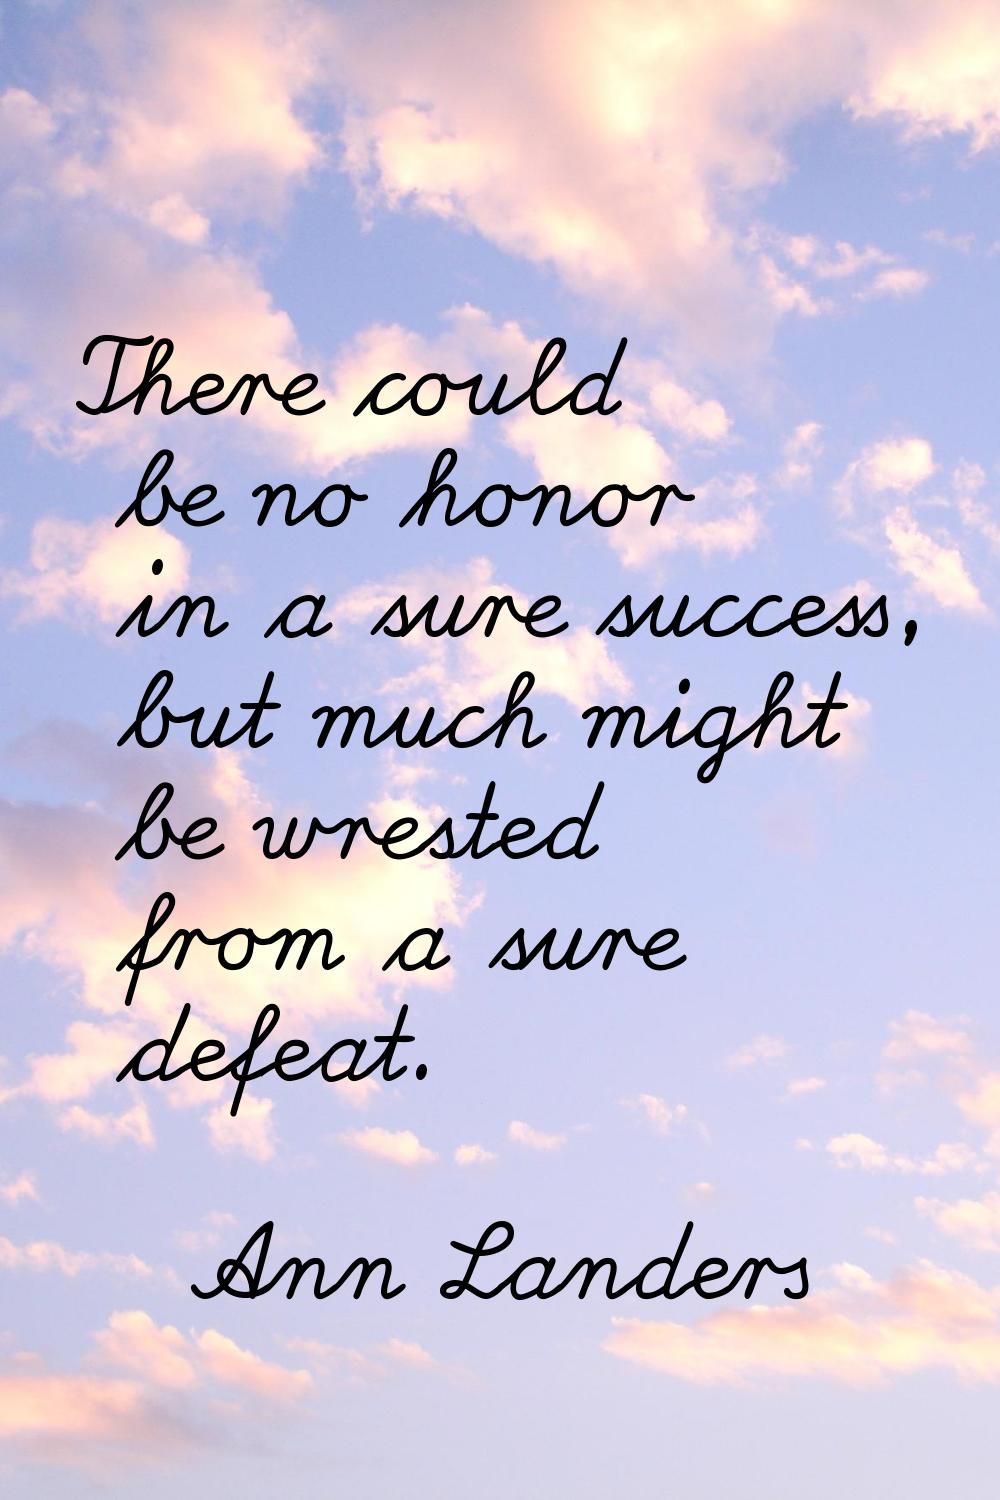 There could be no honor in a sure success, but much might be wrested from a sure defeat.